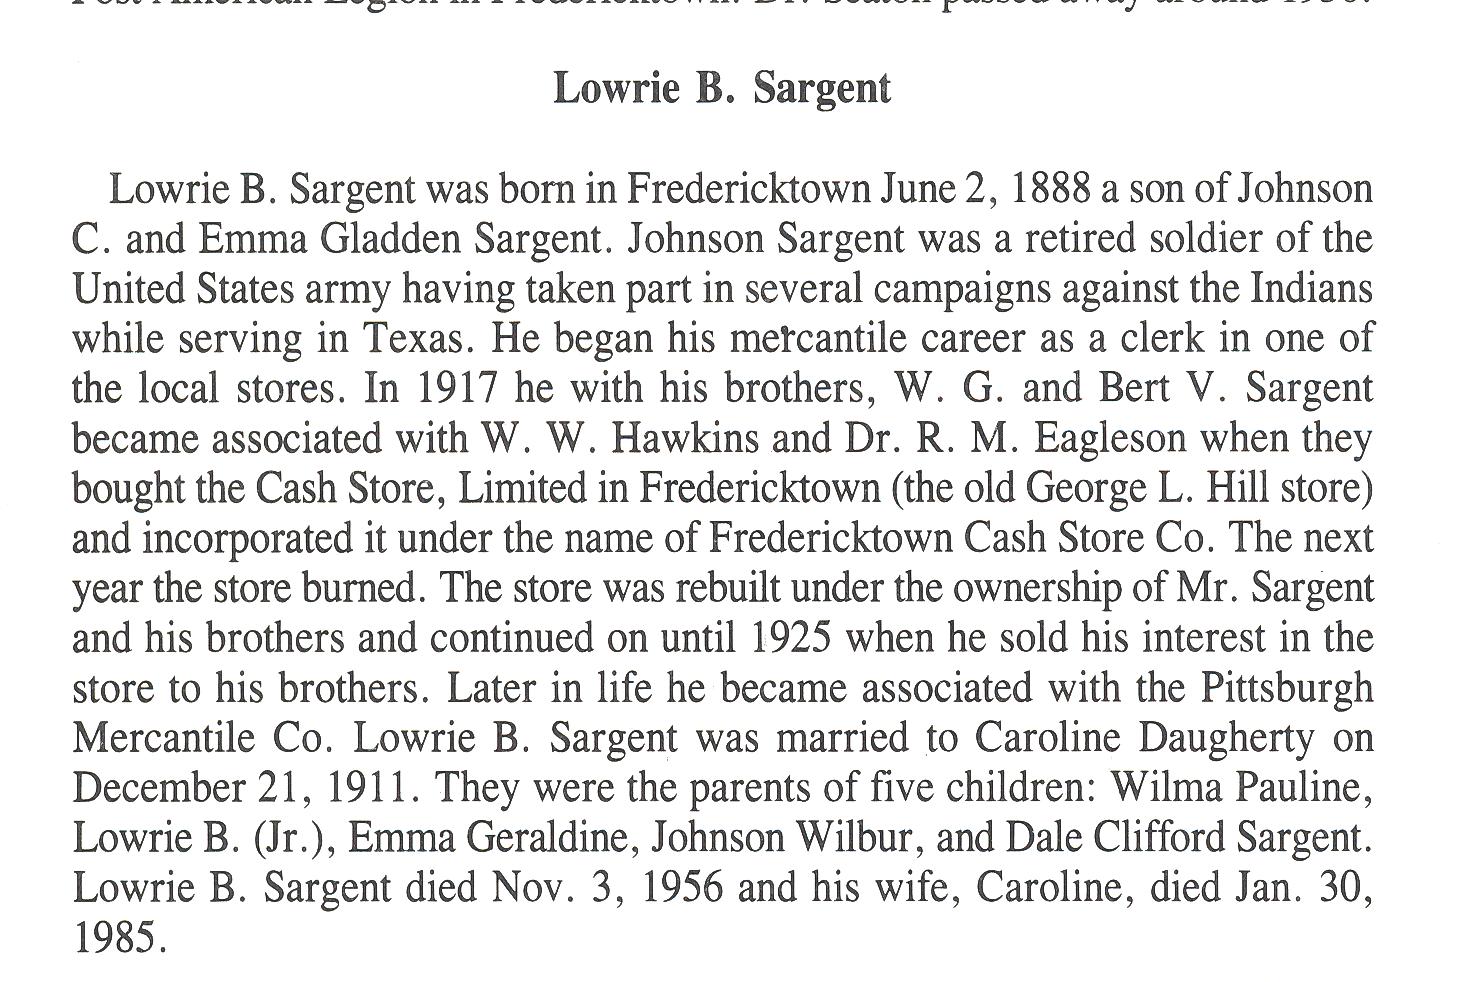 Lowrie B. Sargent